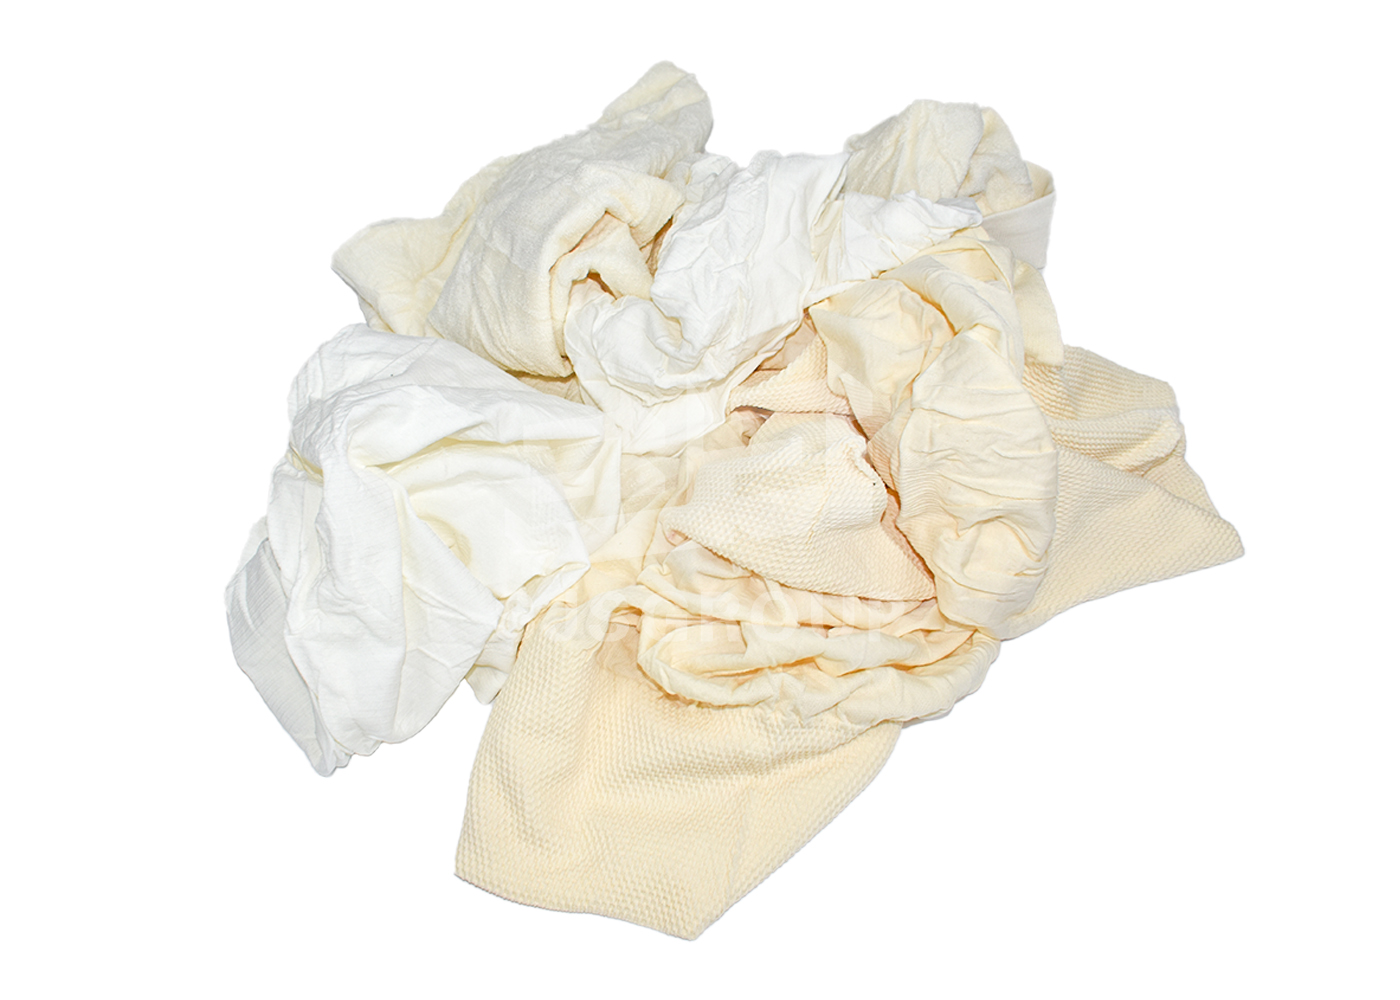 White Bed Sheet Cotton Rags (Standard Size), White Bed Sheet Rags